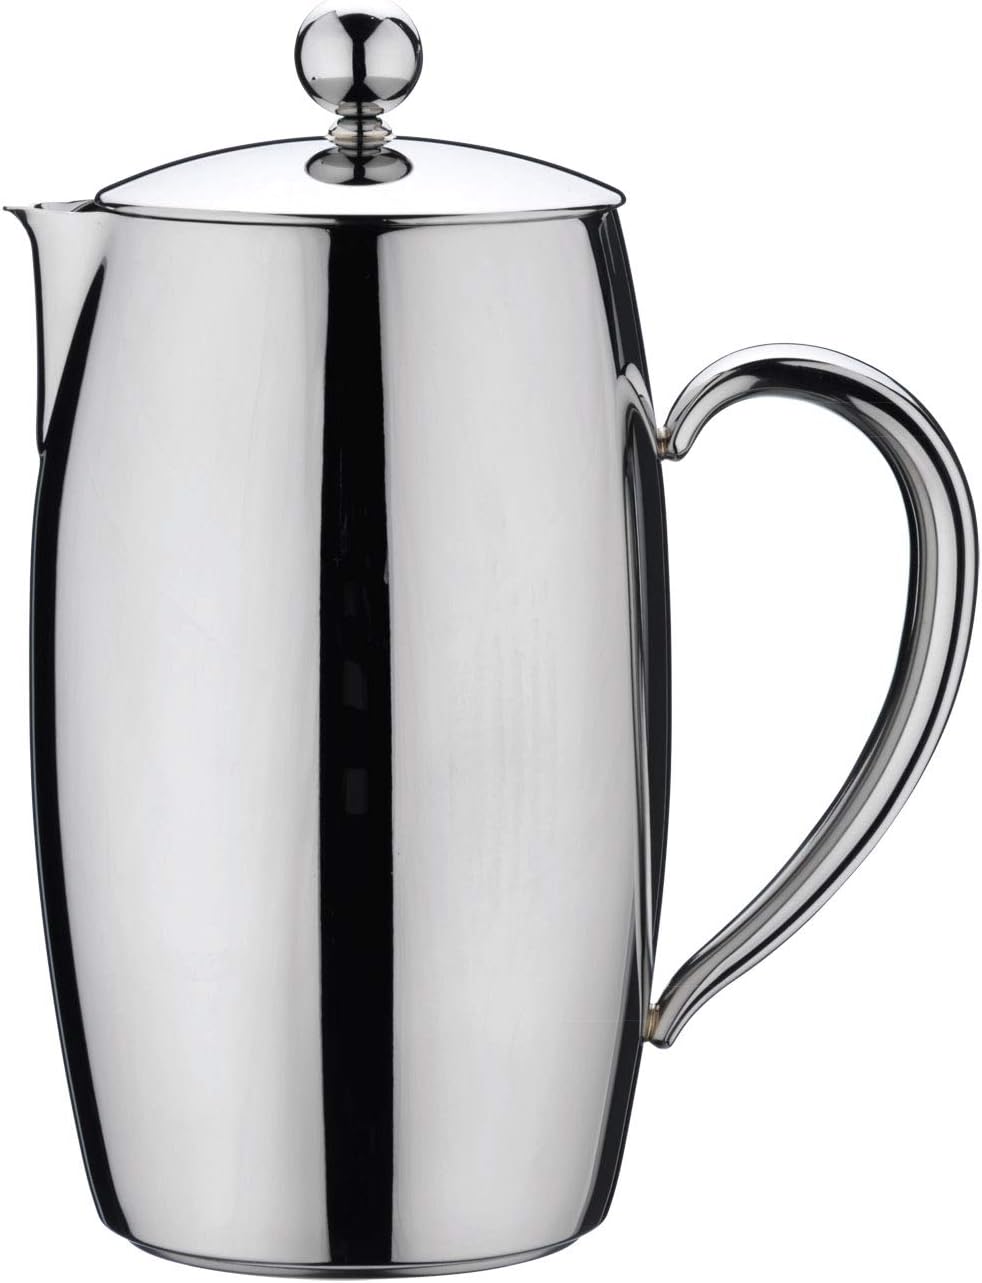 Cafe Stal Café Stal Stainless Steel Cafetiere